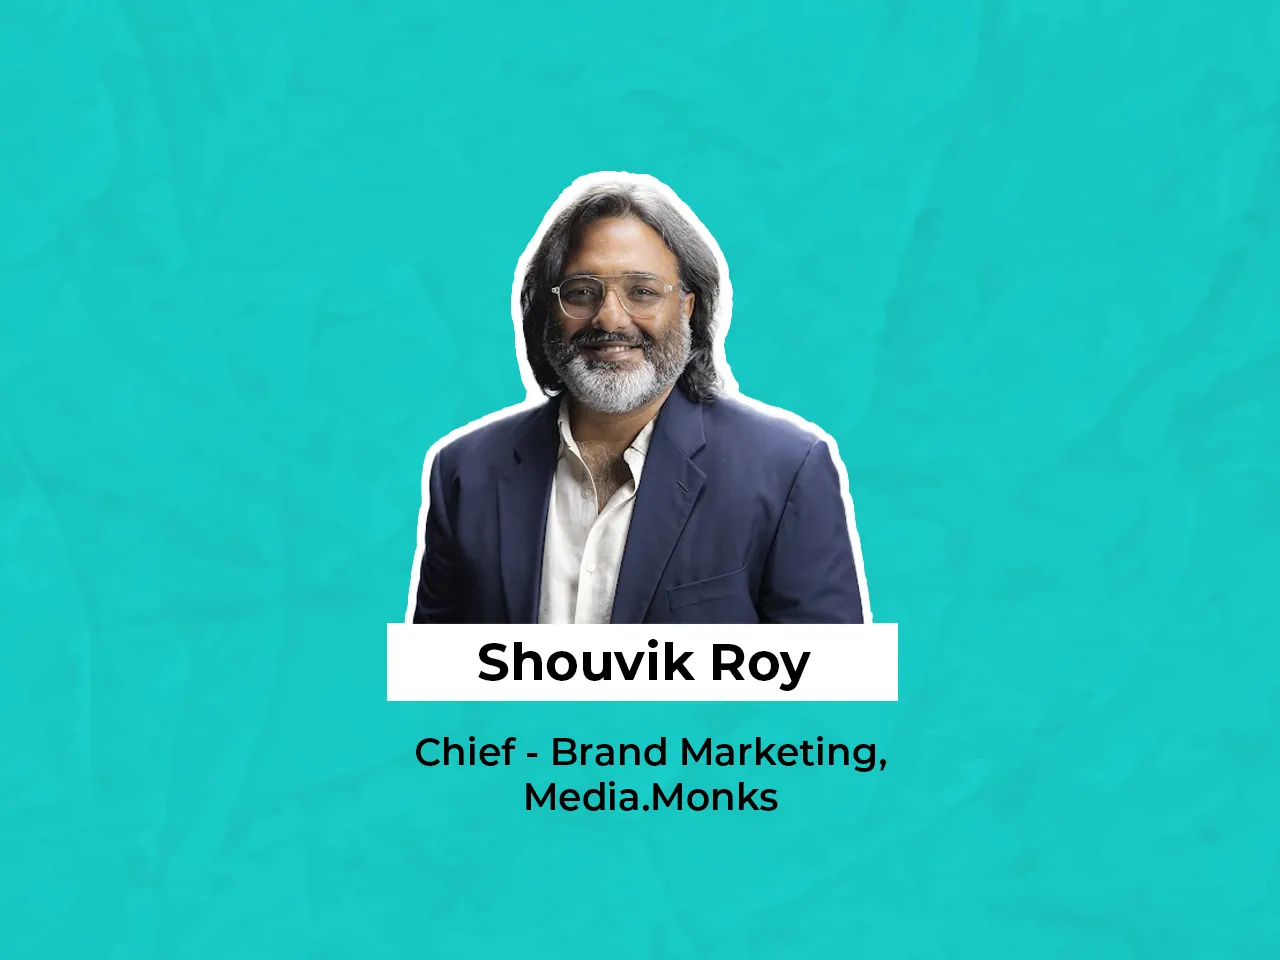 Media.Monks India onboards Shouvik Roy as Chief of Brand Marketing